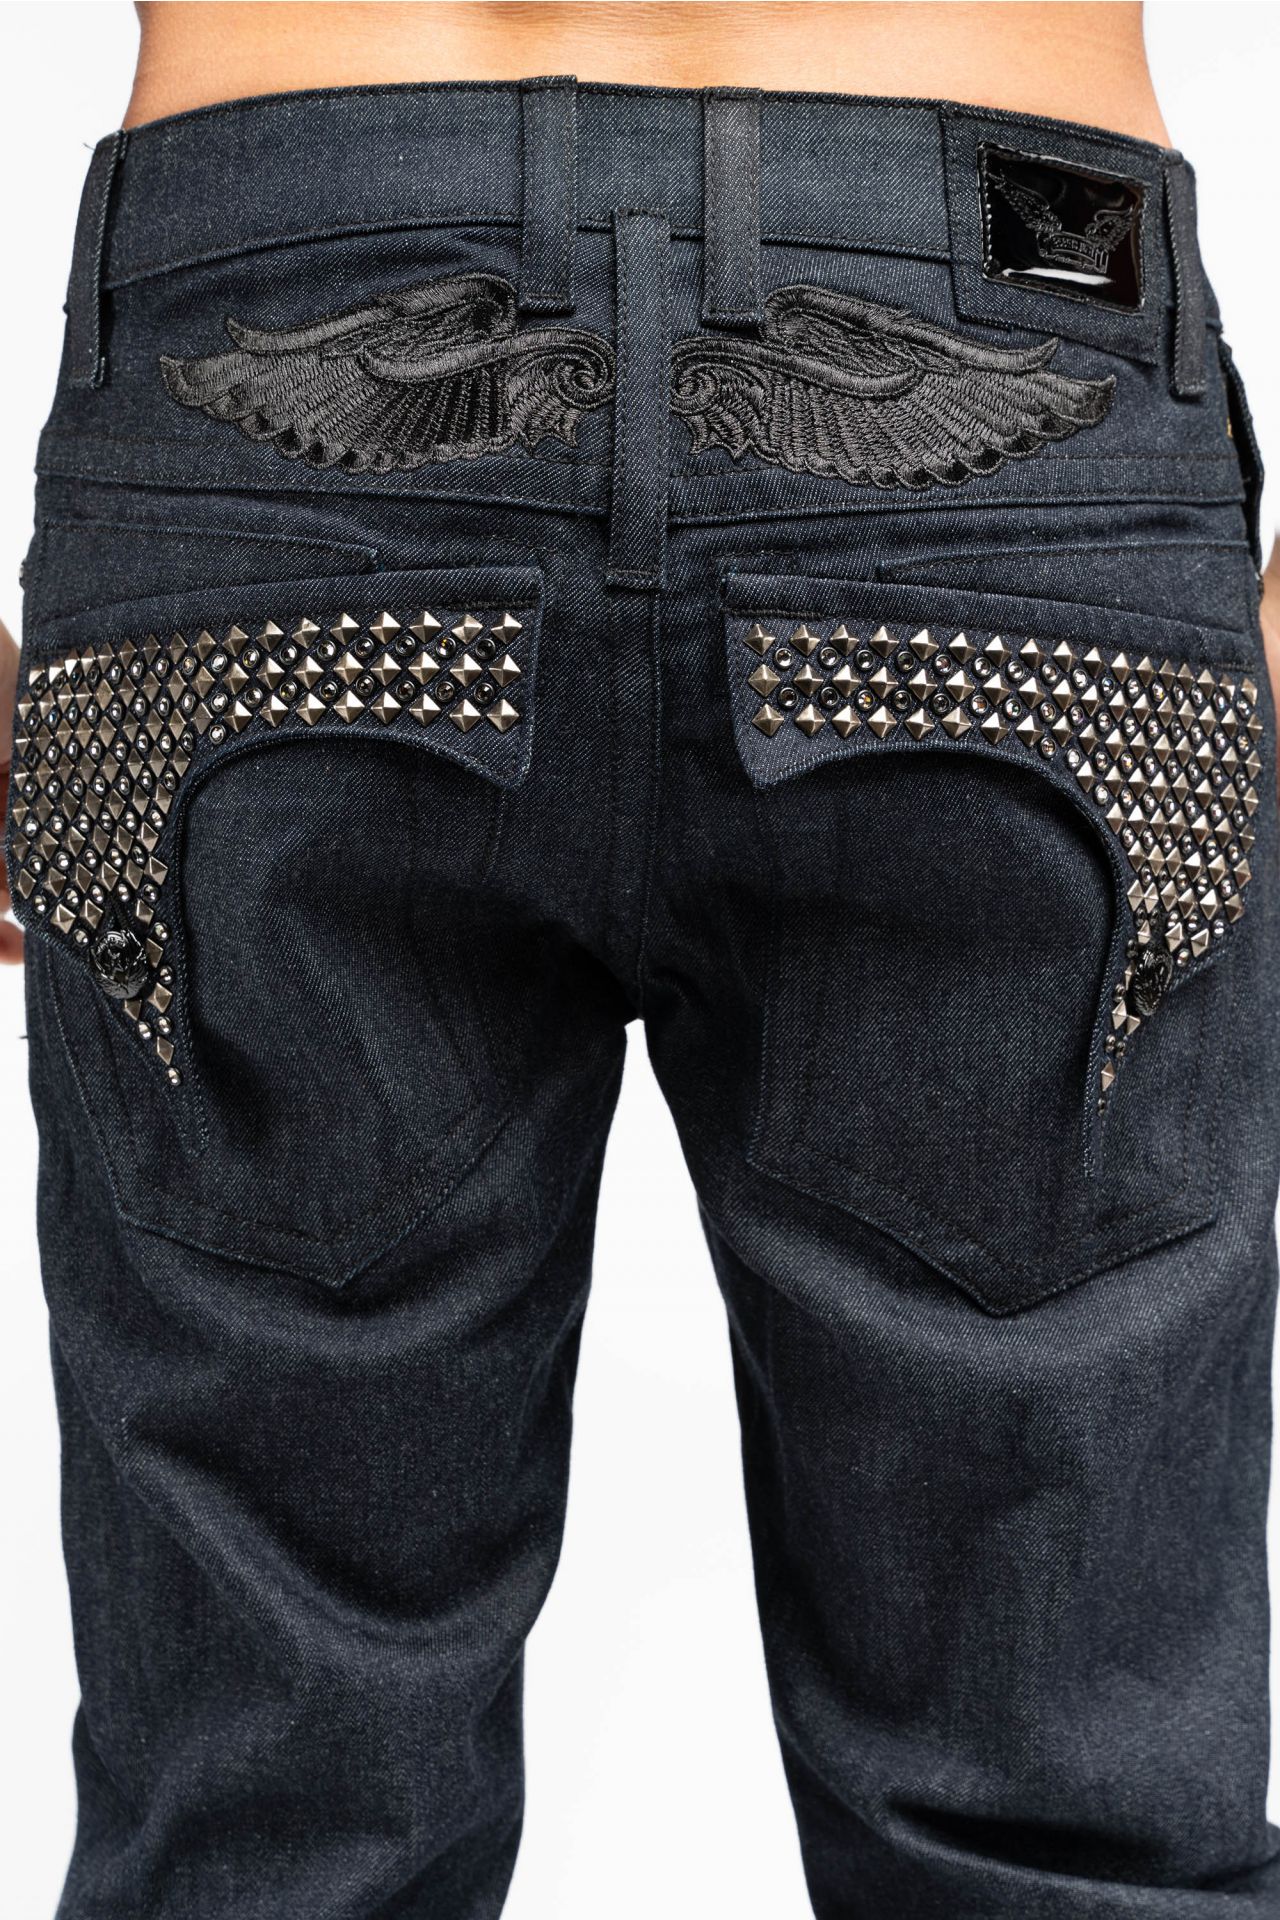 MENS RAW DENIM SLIM FIT KILLER FLAP JEANS WITH WINGS STUDS AND CRYSTALS